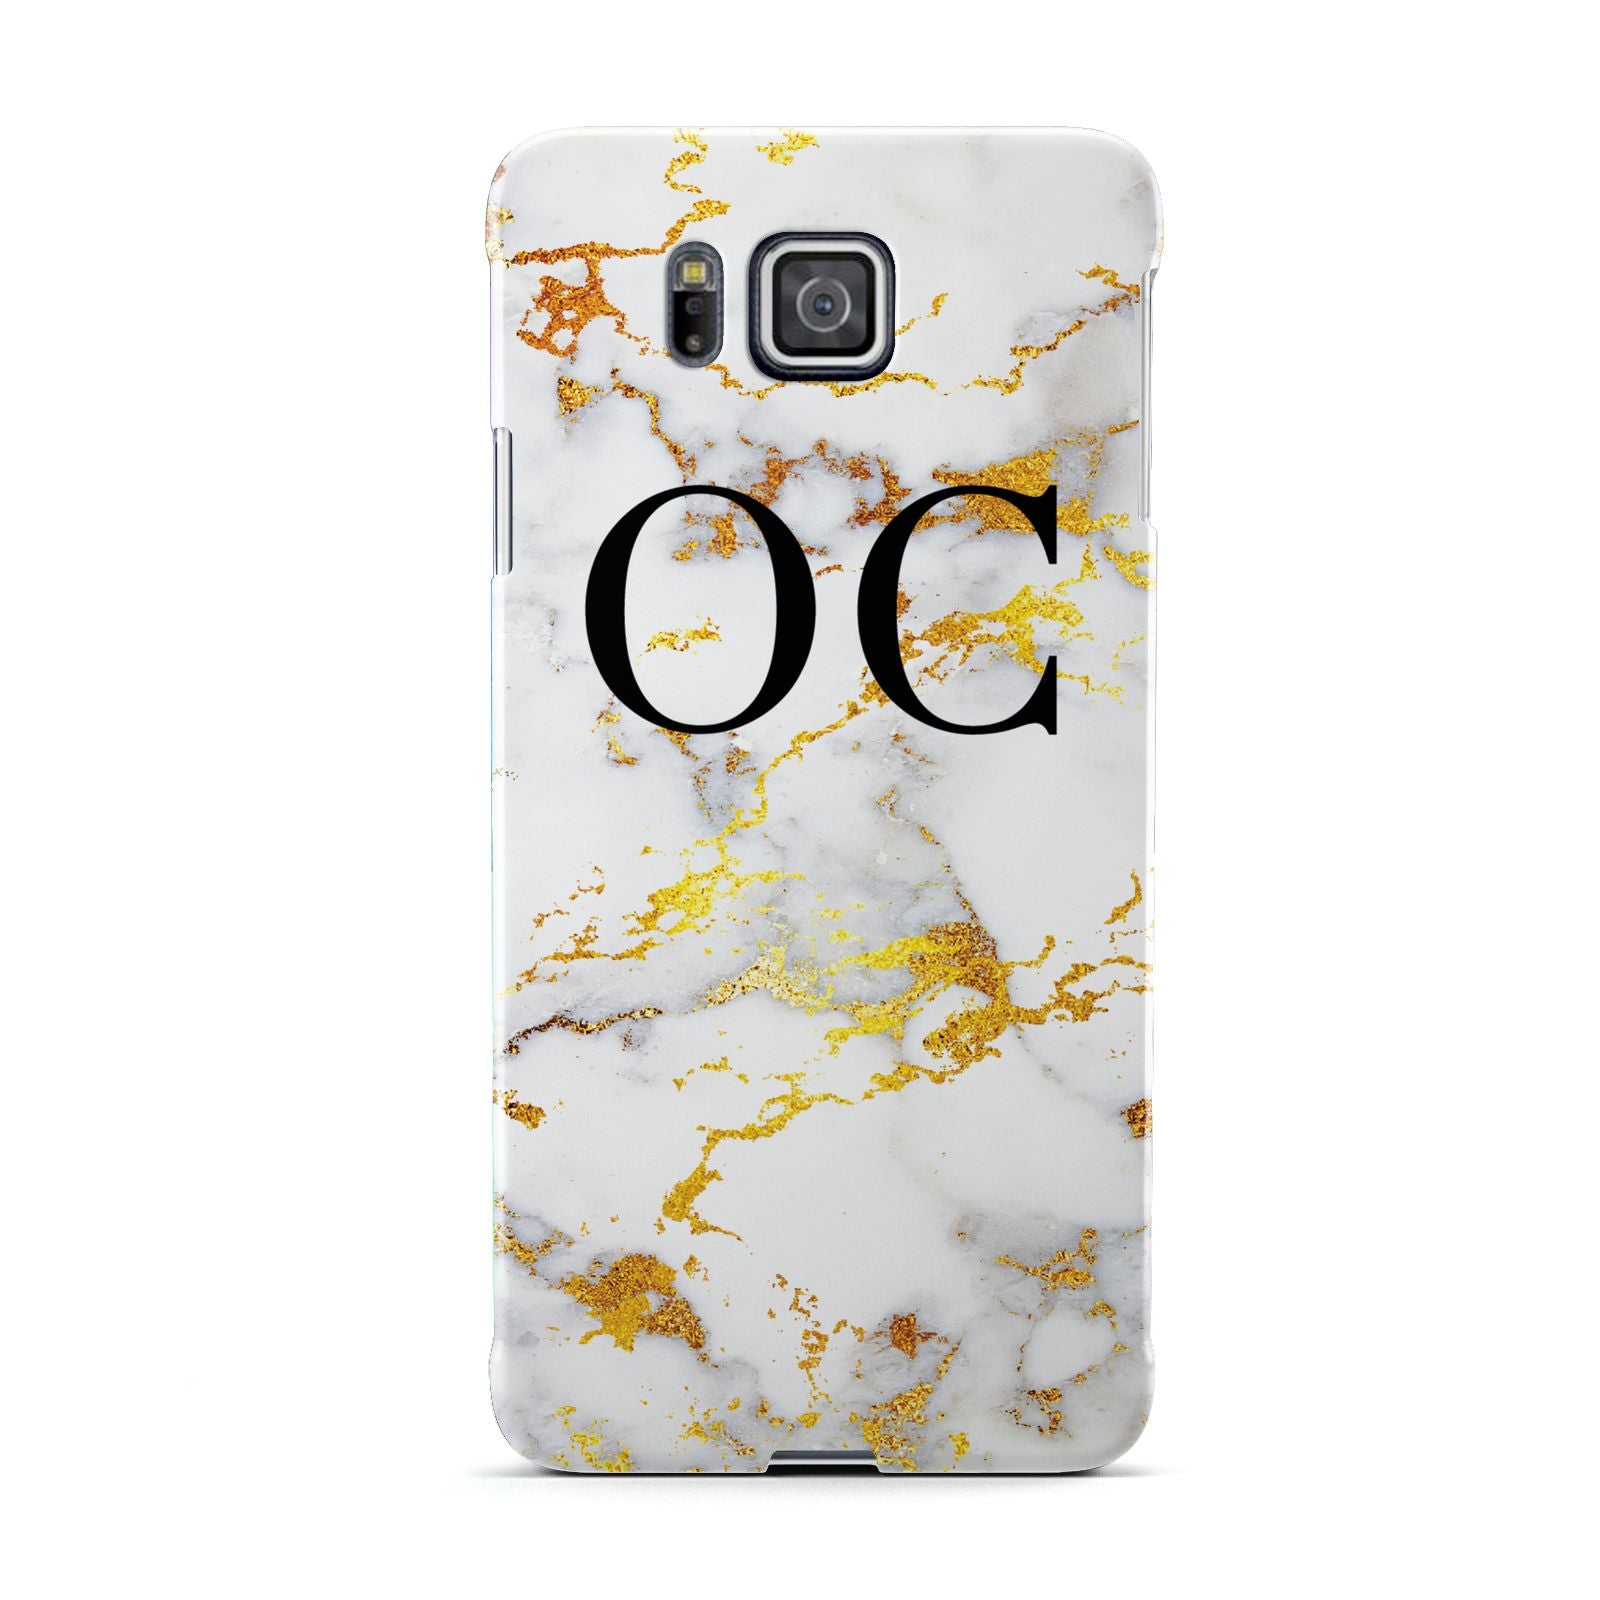 Personalised Gold Marble Initials Monogram Samsung Galaxy Alpha Case